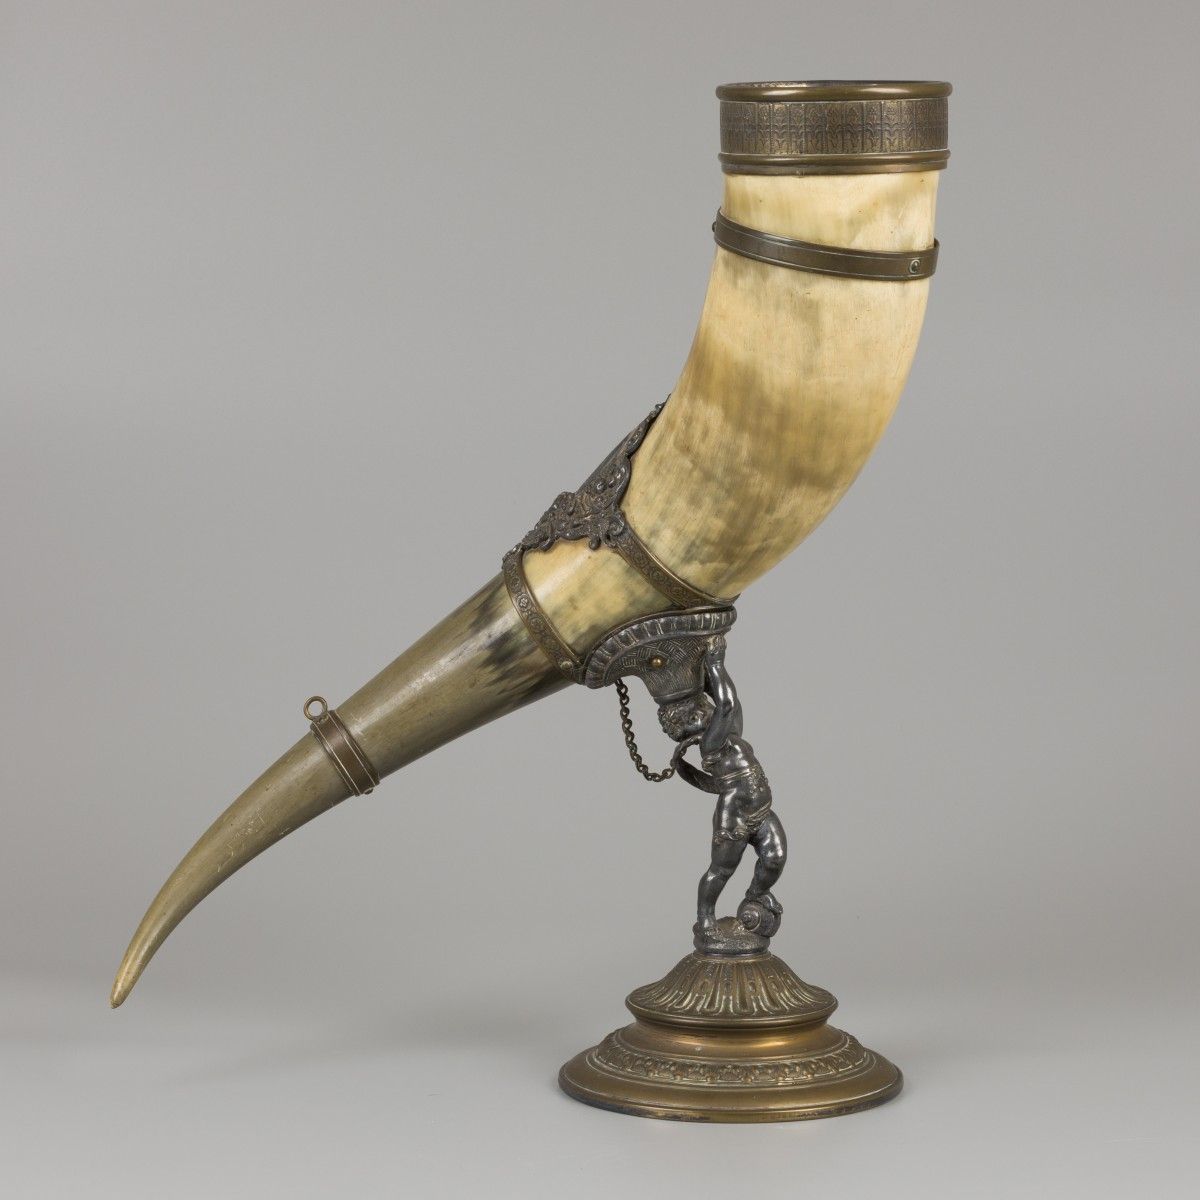 A drinking horn made of an ox horn, carried by a putto, ca. 1920. 估计：70 - 90欧元。